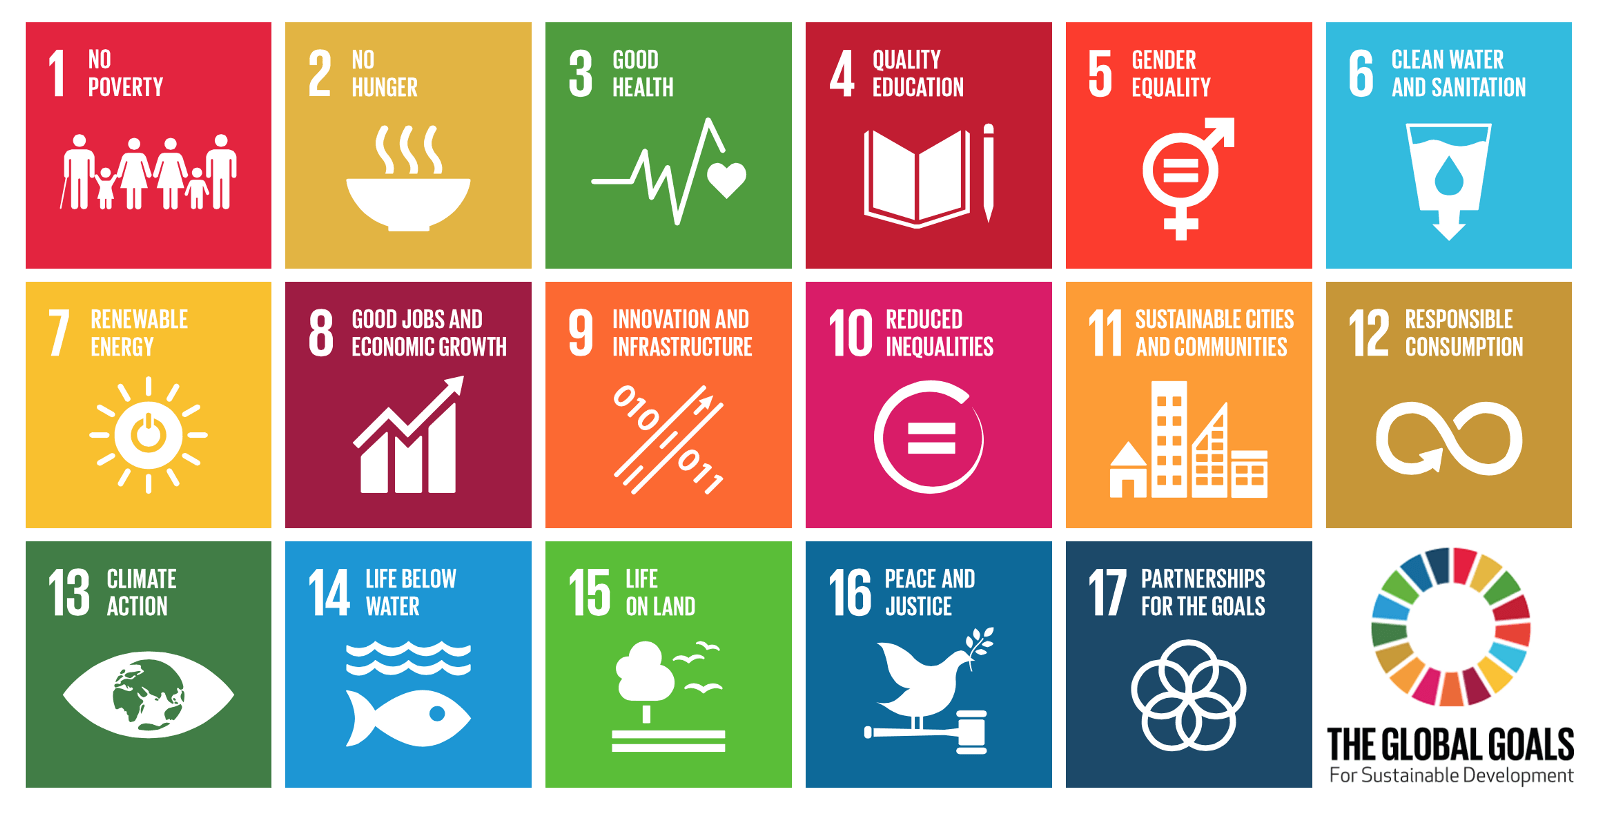 Tobacco Industry Logo - The tobacco industry and the UN Sustainable Development Goals